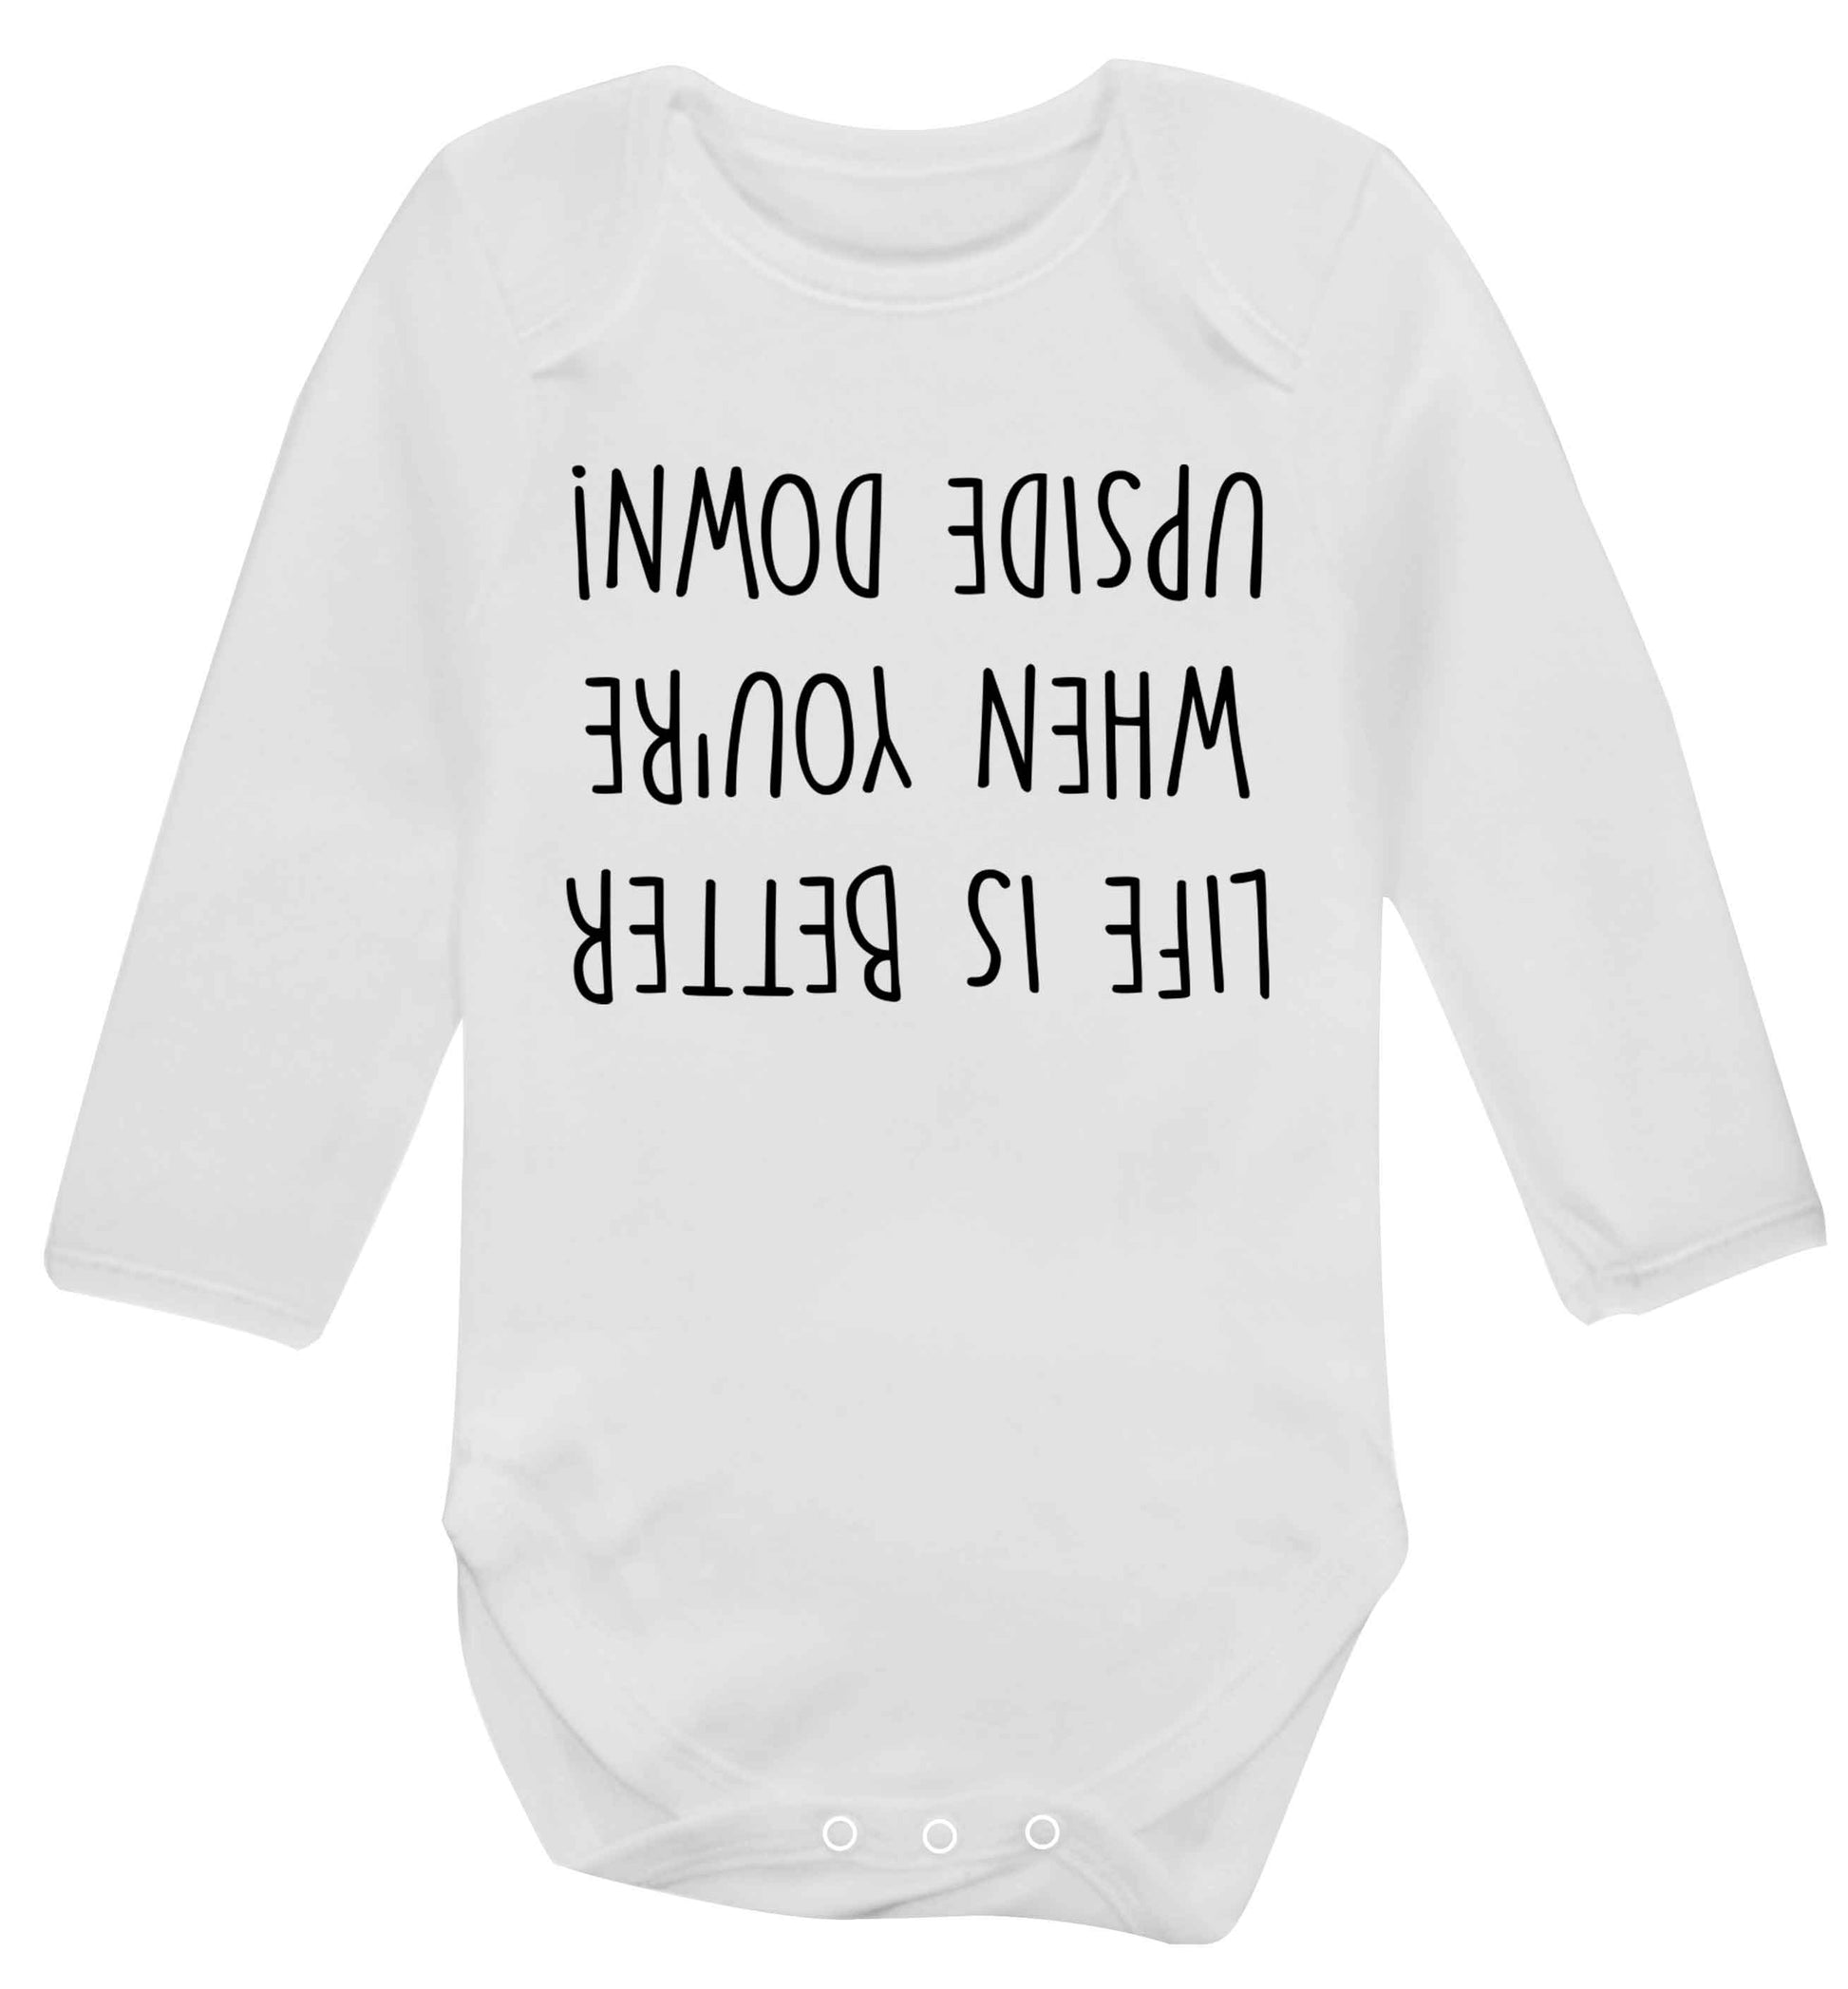 Life is better upside down Baby Vest long sleeved white 6-12 months